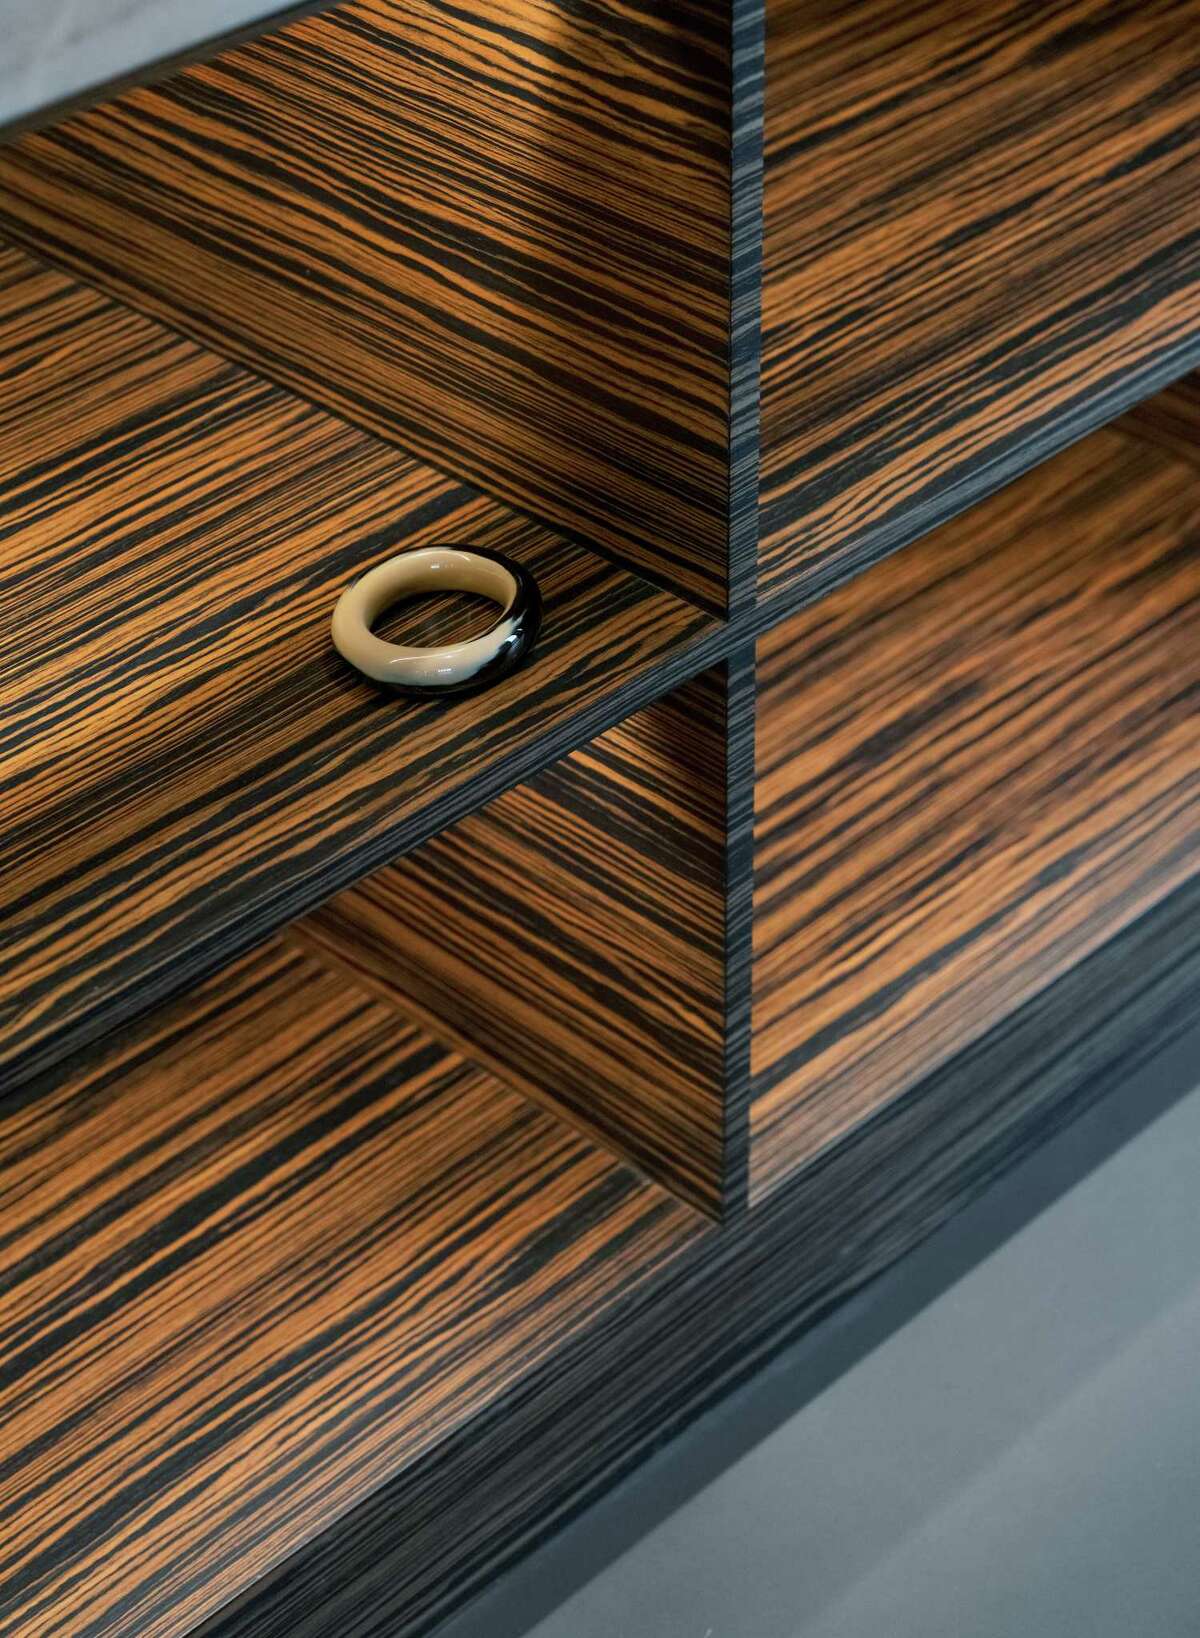 The contemporary kitchen cabinets are covered with a veneer of Macassar Ebony, an exotic wood grown in Southeast Asia and featuring a dramatic striped pattern. 